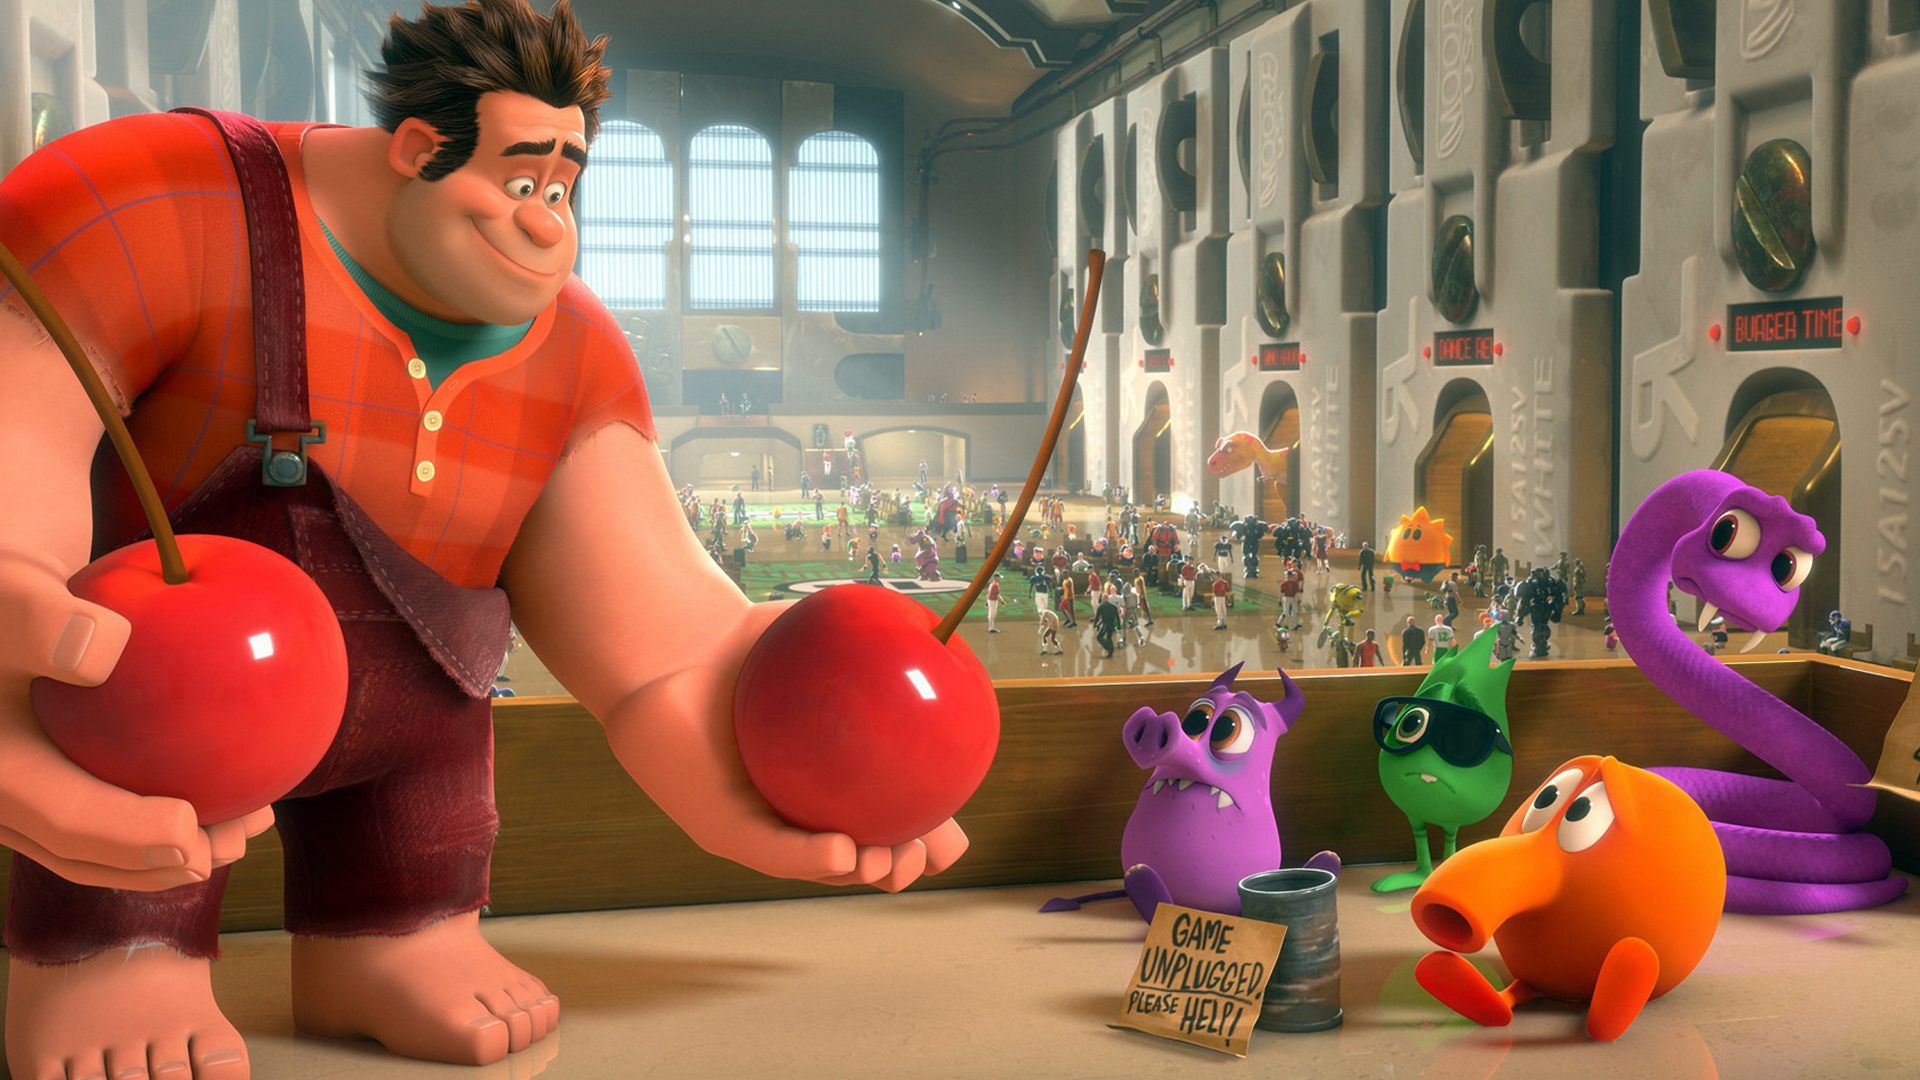 A scene from Wreck-It Ralph